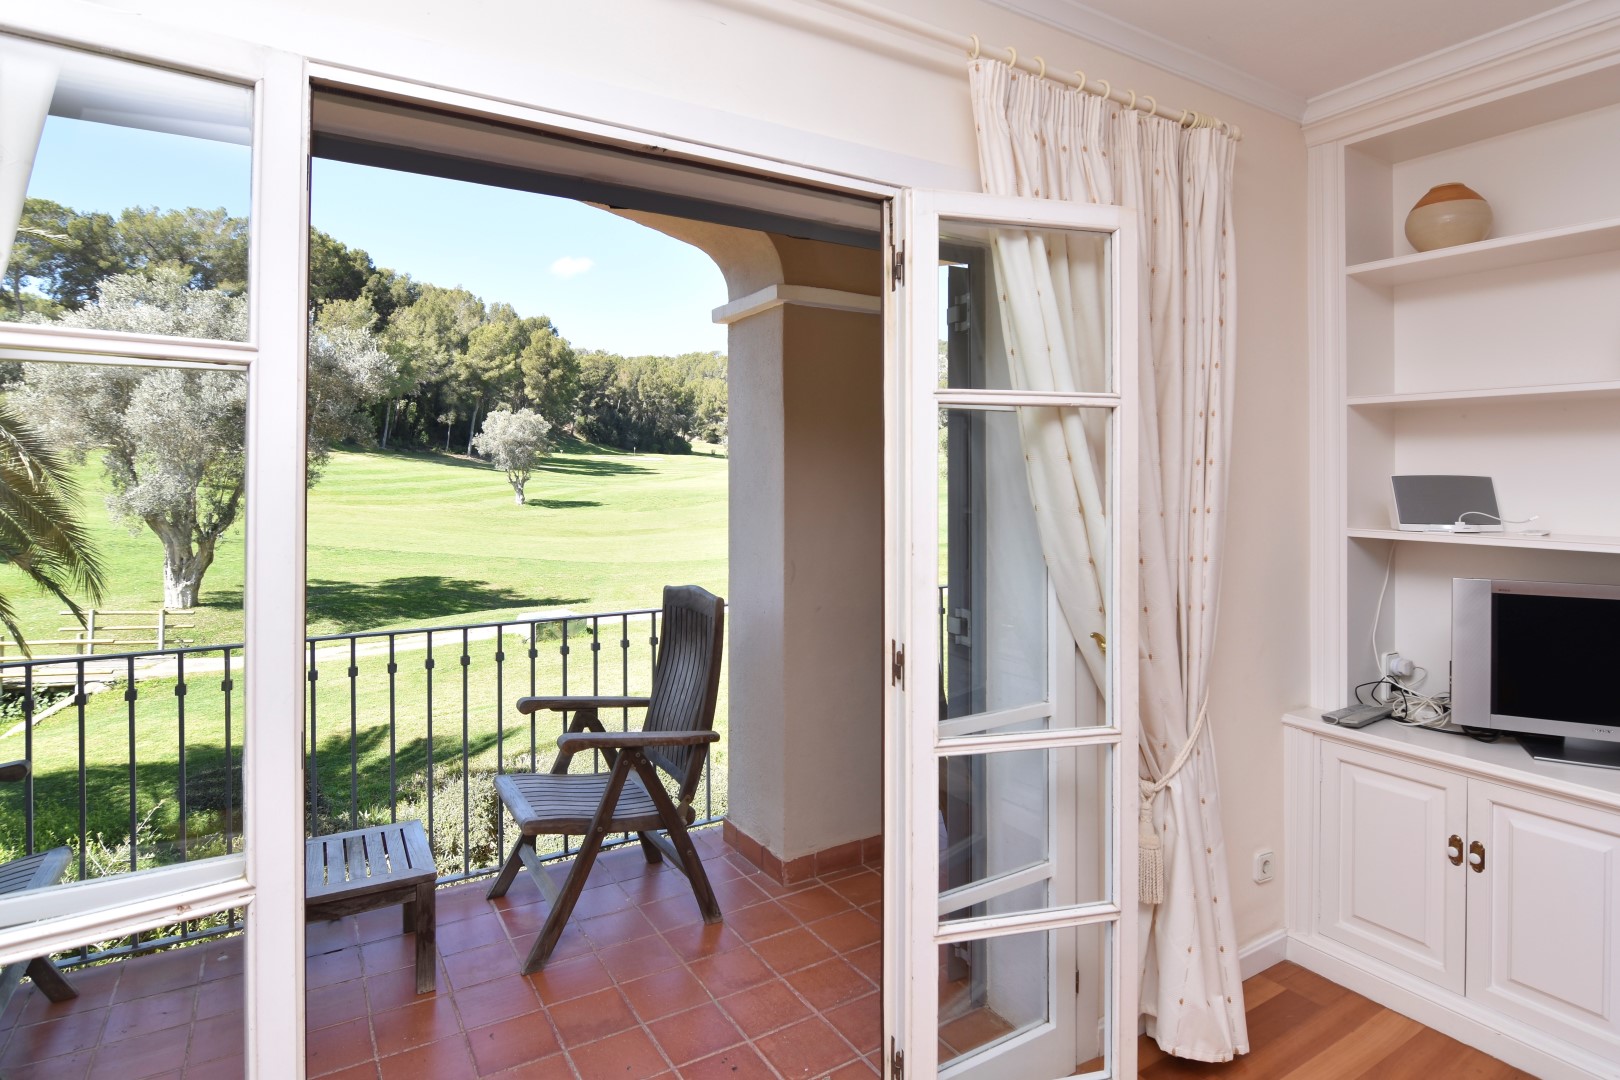 3 bed apartment with frontline golf course views